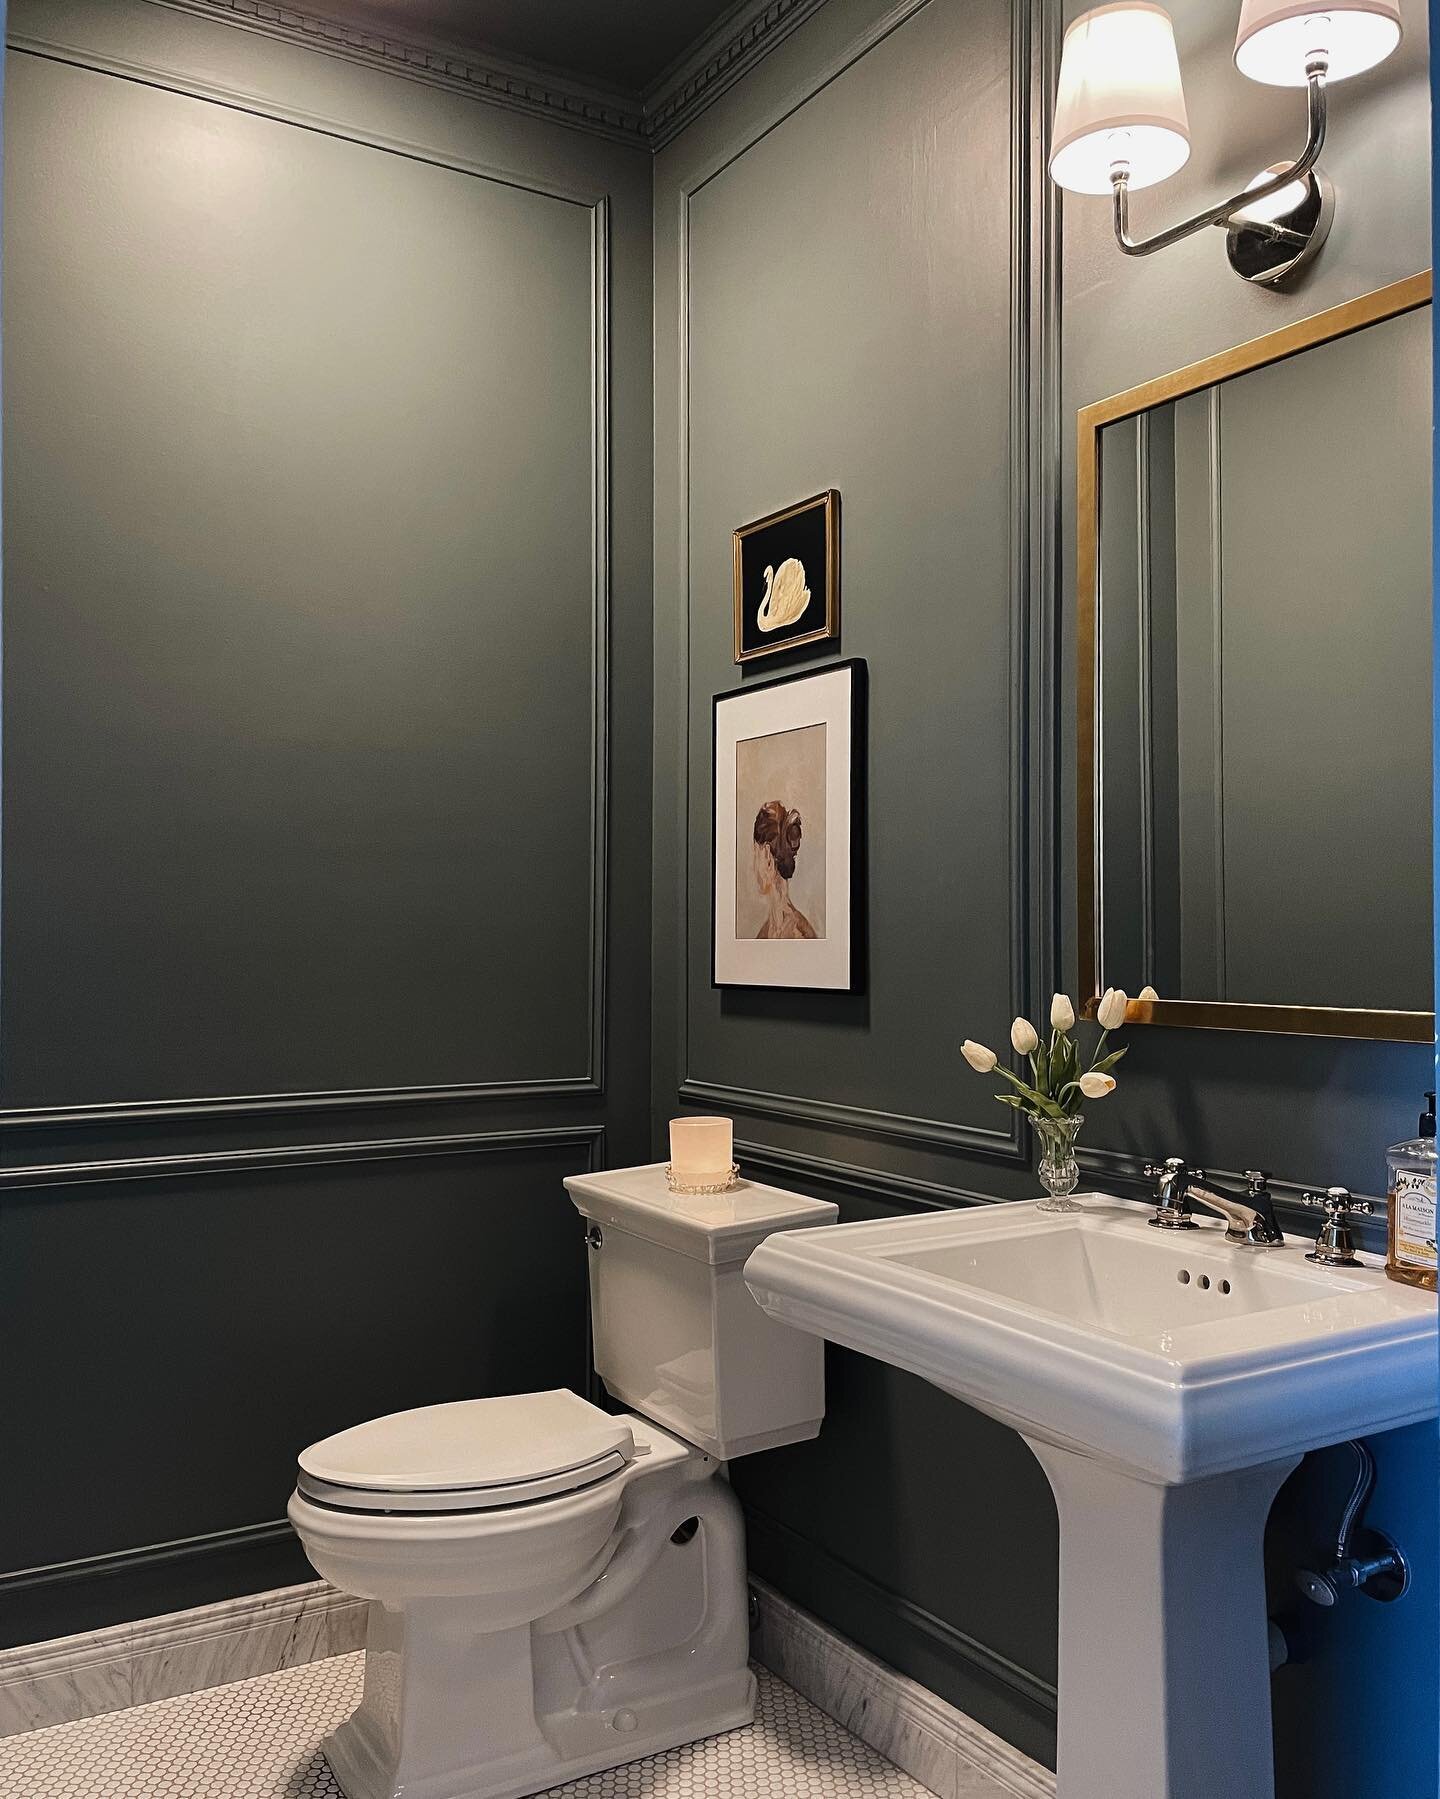 Still my favorite transformation (swipe!) ☺️
 
Team moody powder rooms forever, right?! 

Color: Knoxville Gray (50% strength) by Ben Moore. Eggshell all around